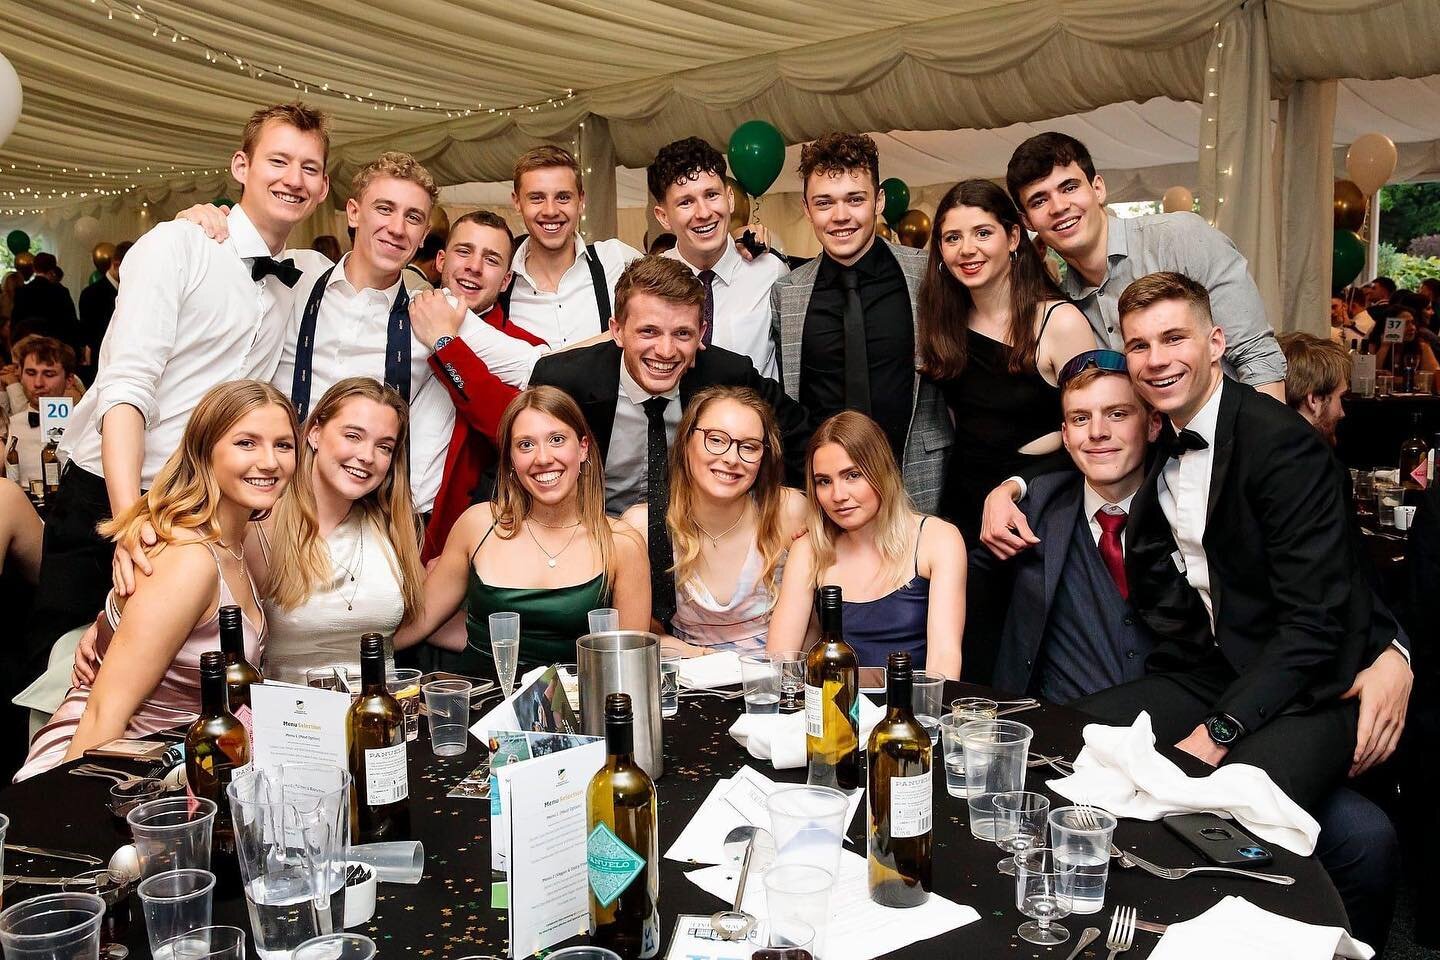 Sports Ball 2022! 🎊 

We had a great night on Wednesday celebrating what has been a record breaking year for our club @uontri !

Without this committee none of what we have achieved this year would have been possible, so the party was definitely wel